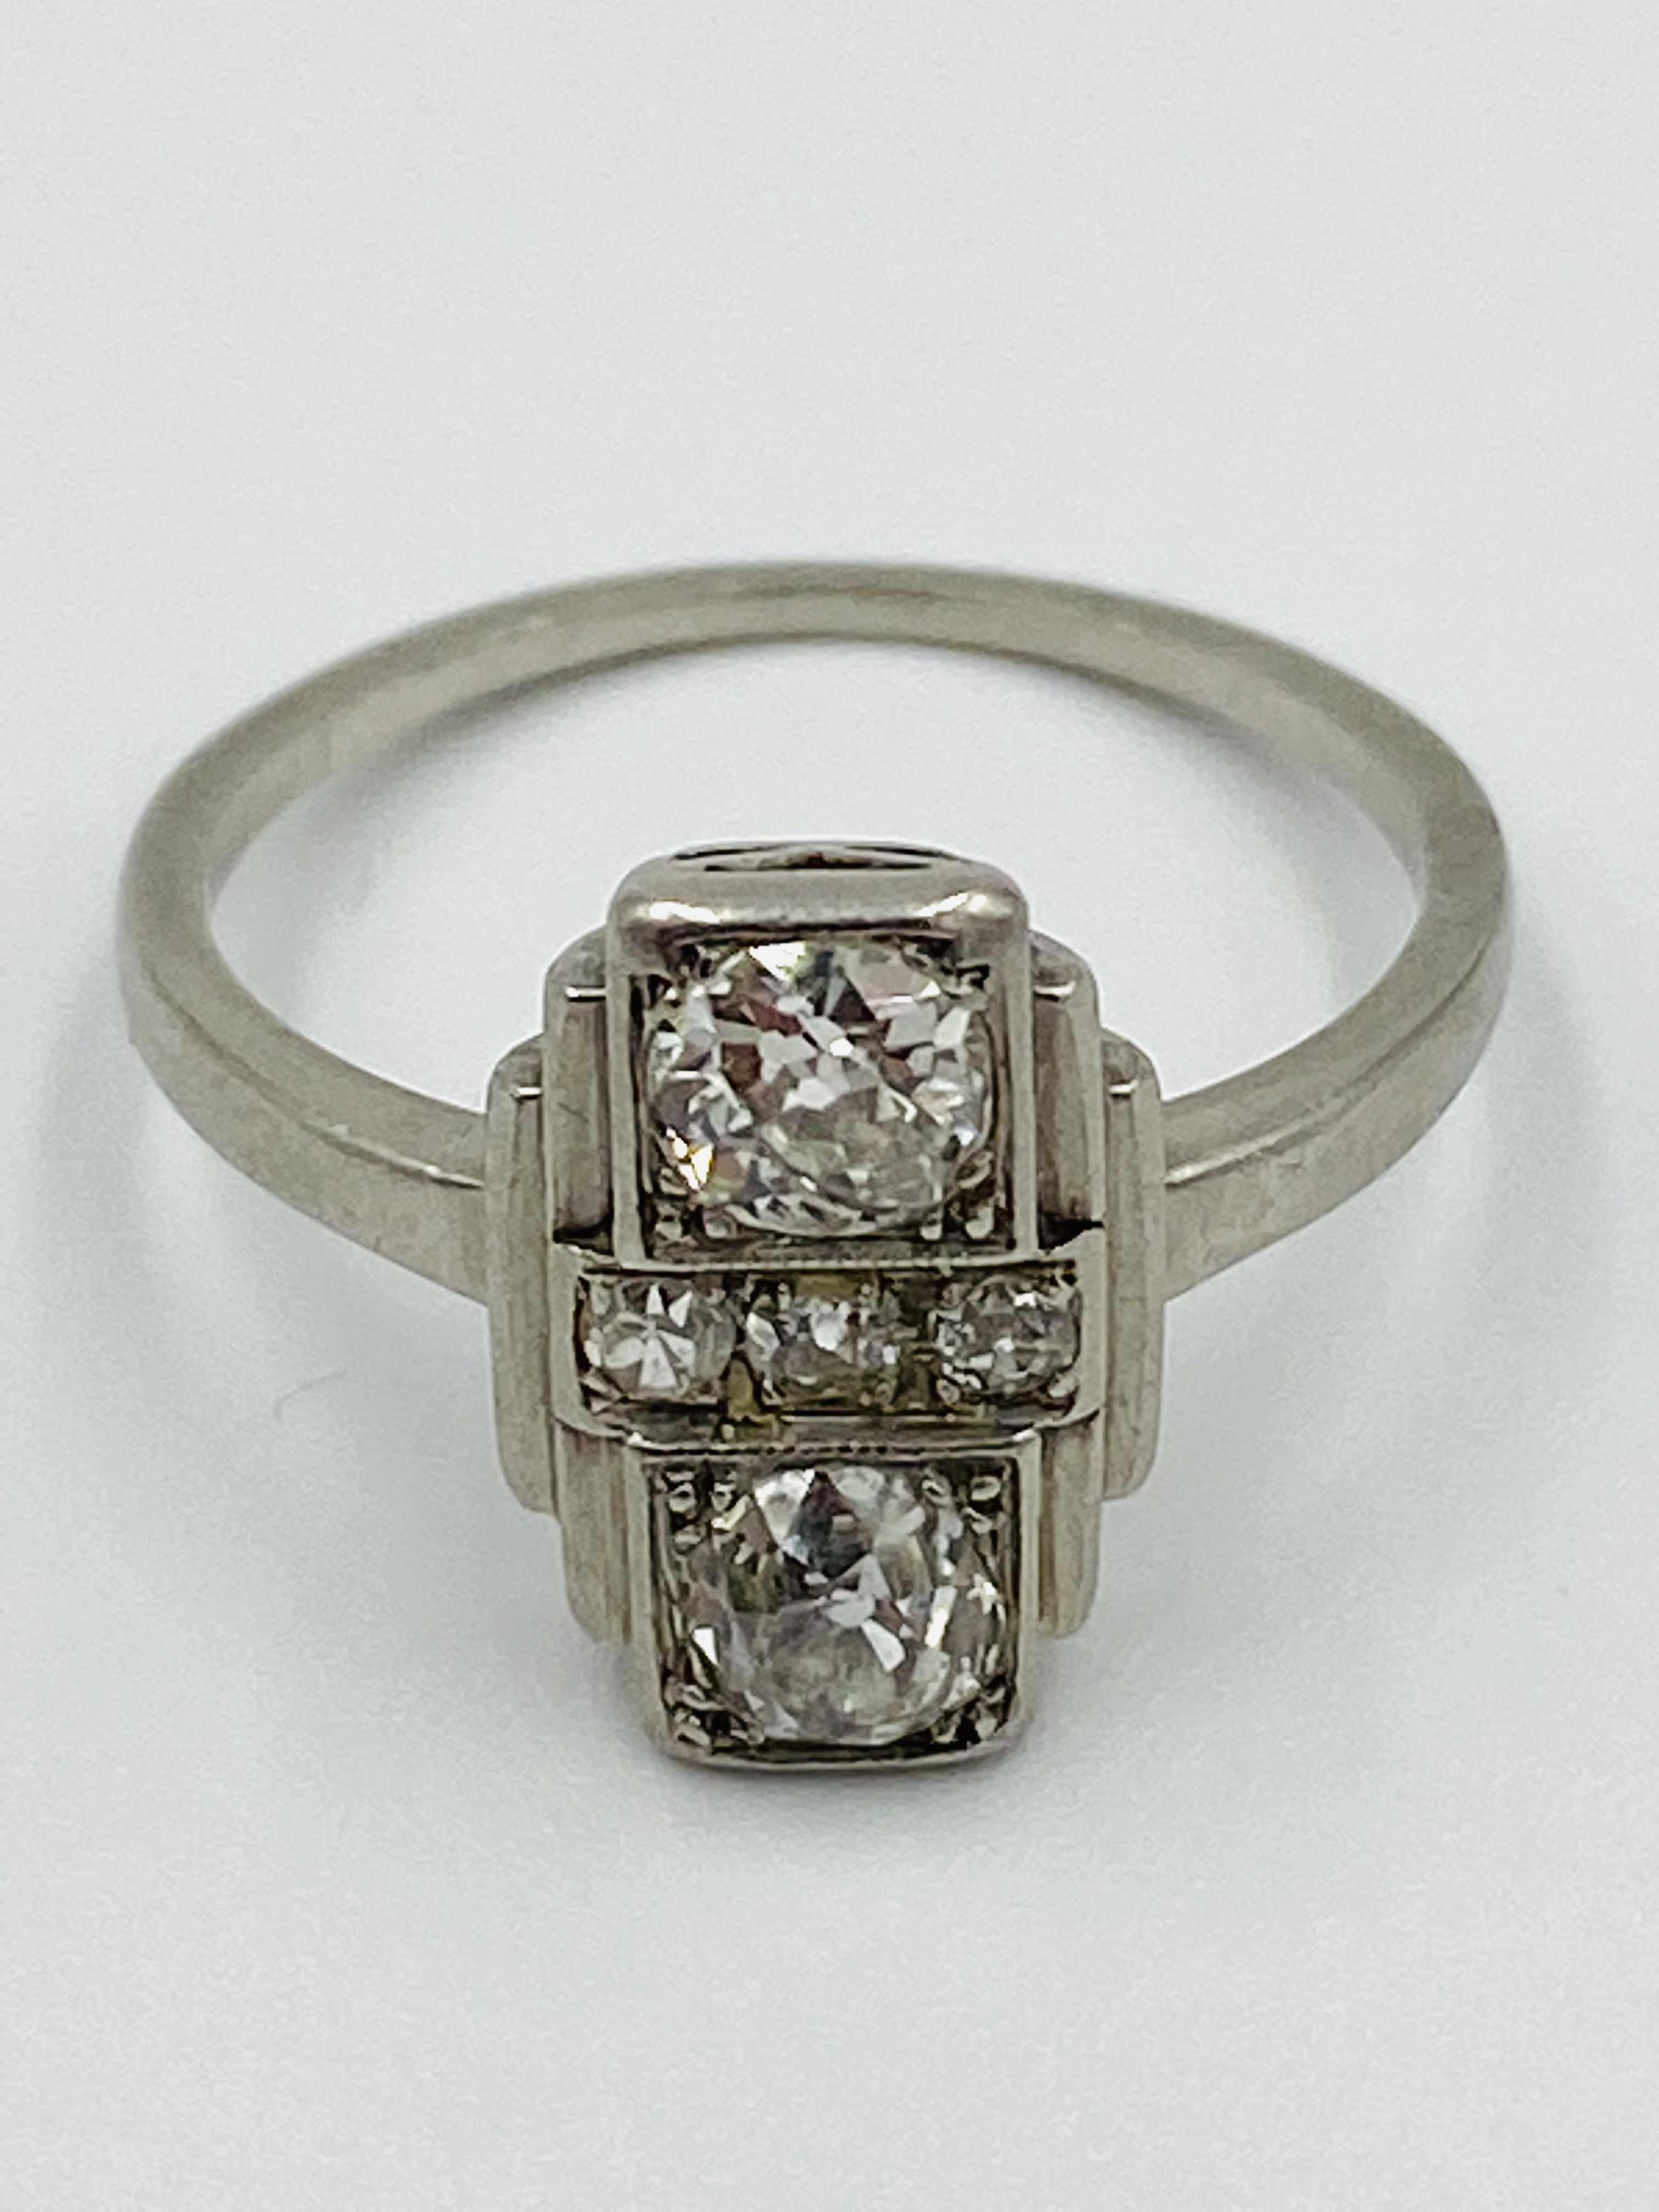 Art deco style platinum and diamond two stone ring - Image 6 of 6